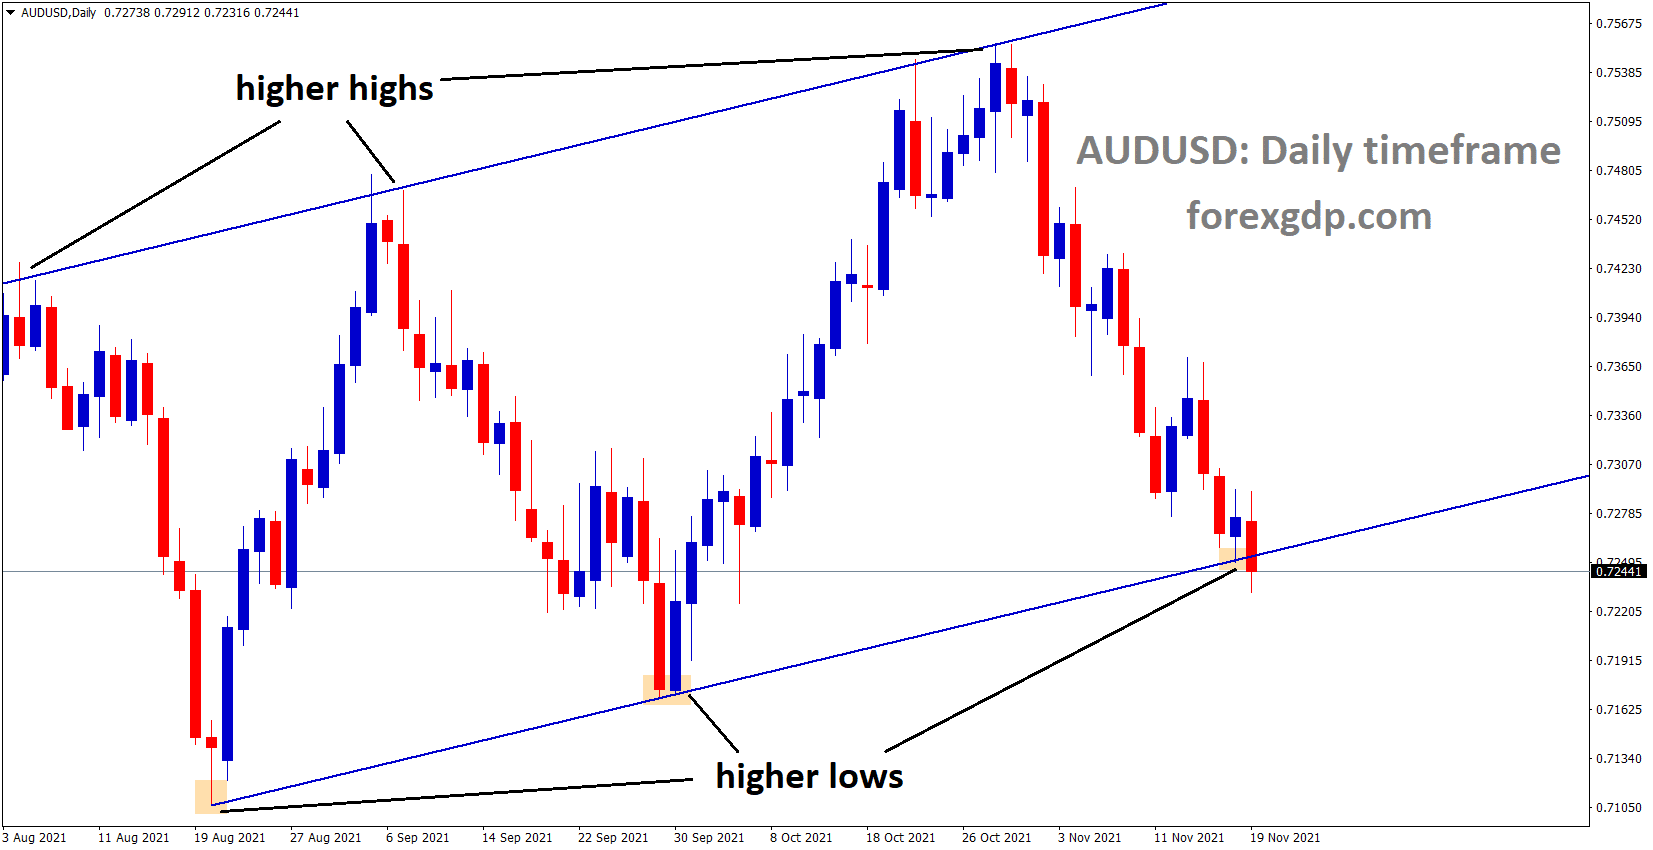 AUDUSD is moving in an Ascending channel and market standing at the make or break higher low area.